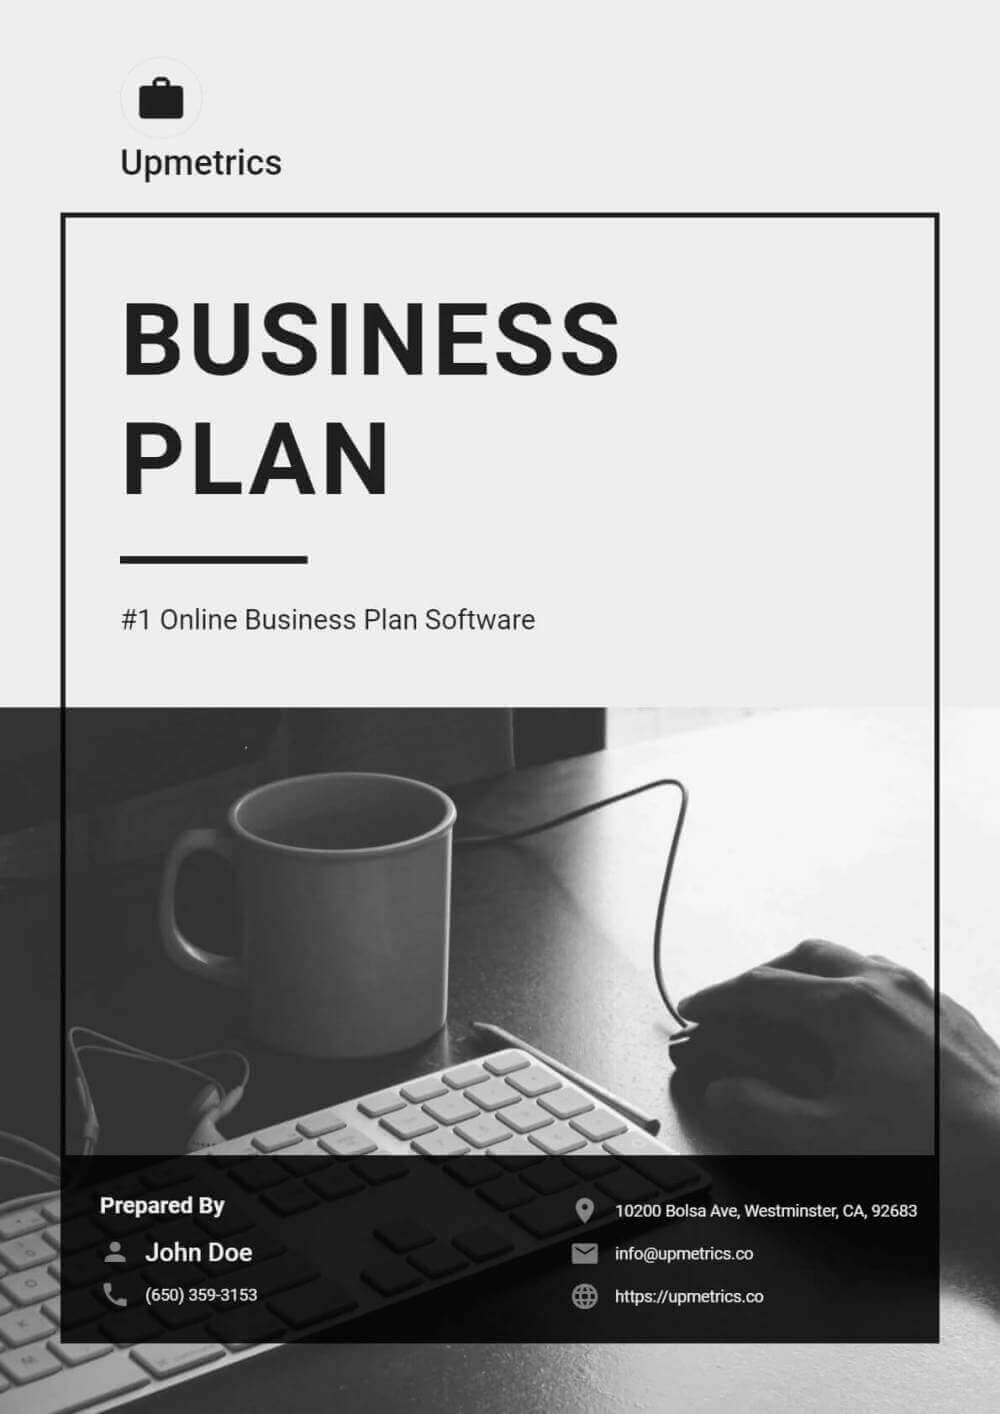 Business Plan Cover Page Designs [FREE DOWNLOAD] | Upmetrics